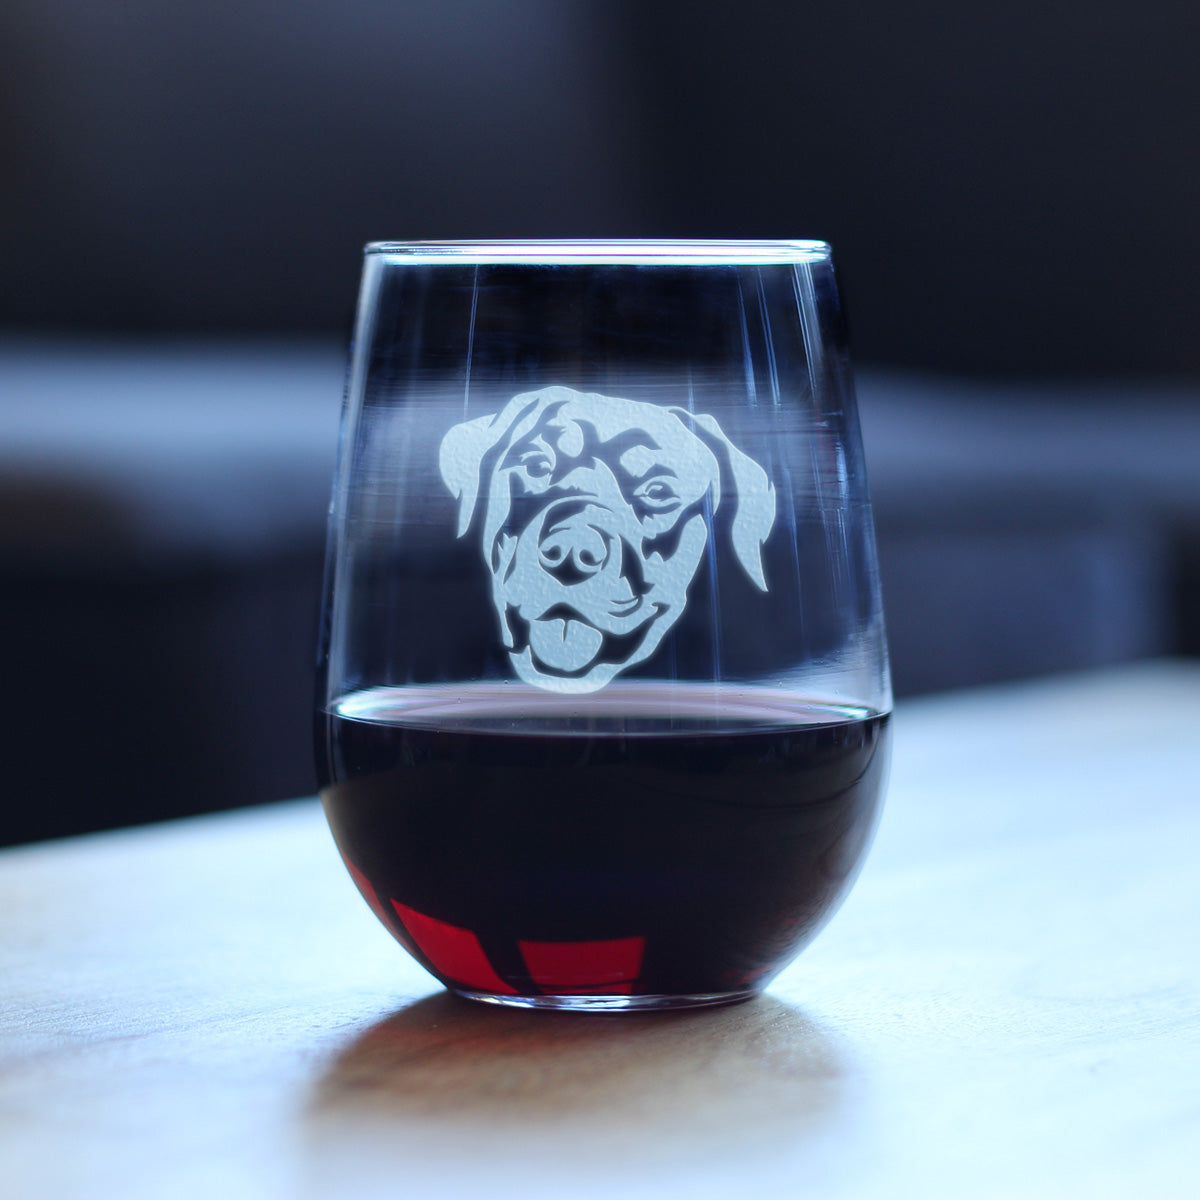 Happy Rottweiler - Stemless Wine Glass - Cute Rottweiler Themed Dog Gifts and Party Decor for Women and Men - Large Glasses